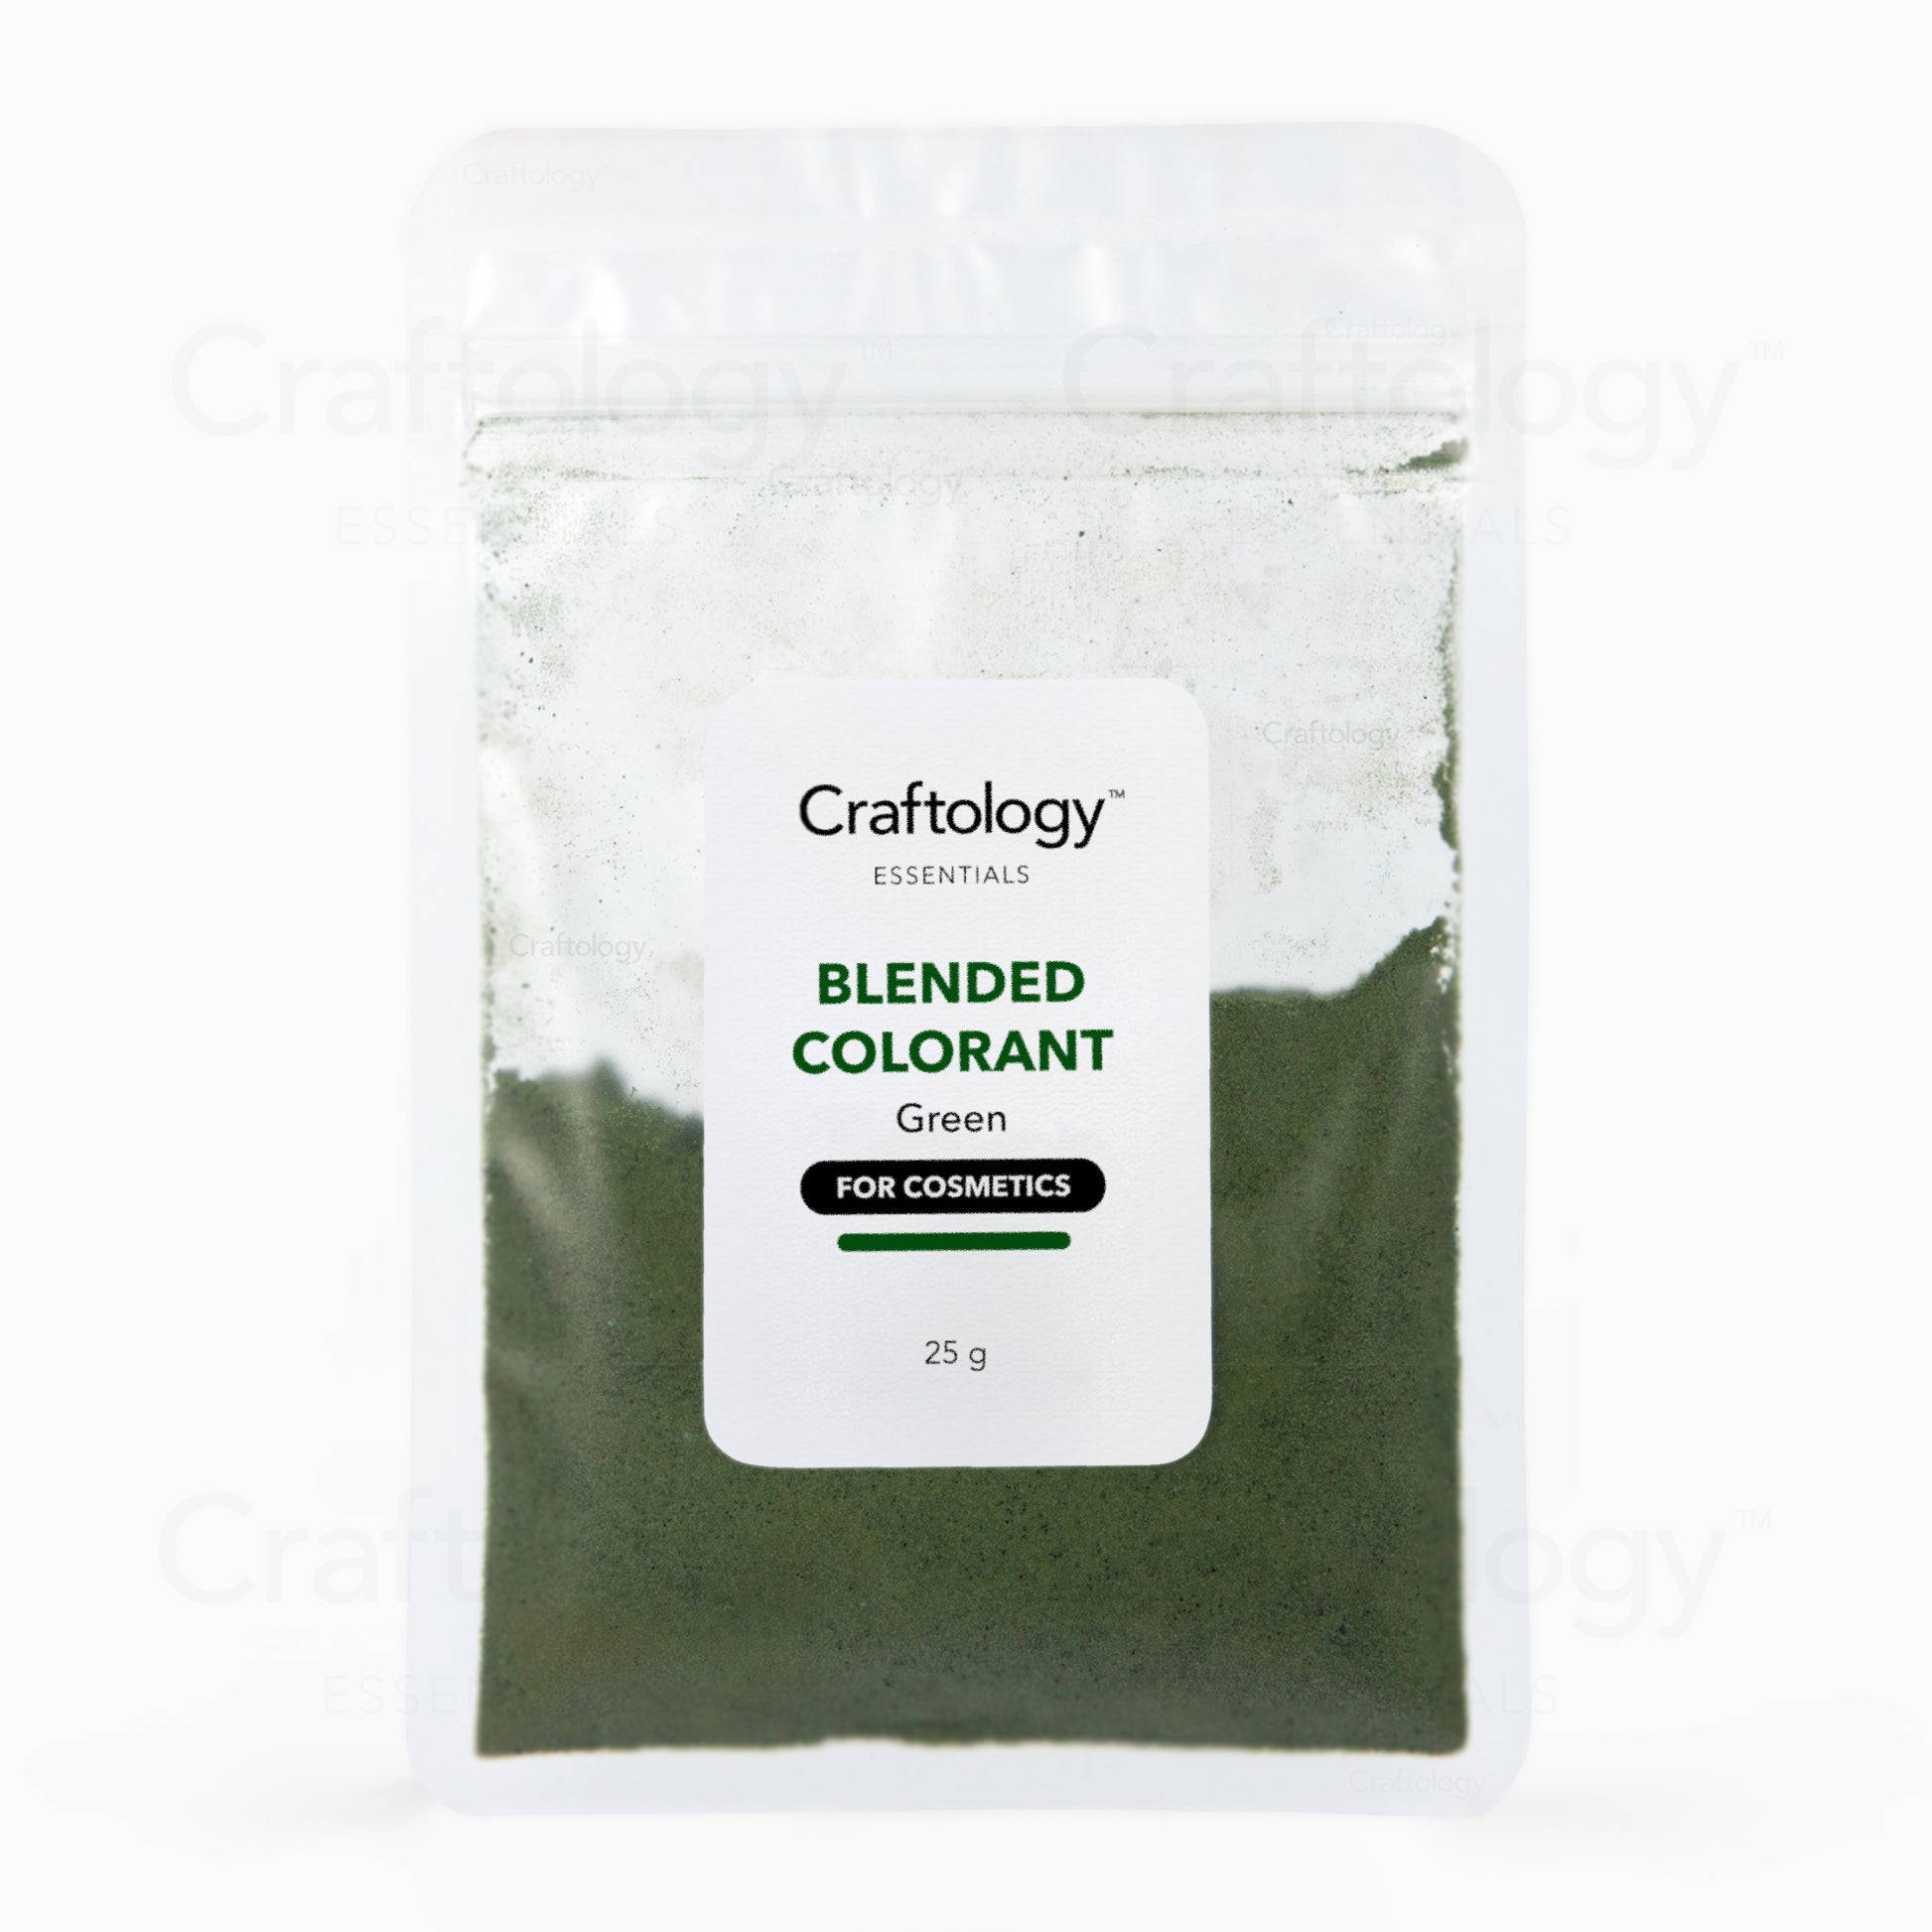 Blended Colorant - Green - Craftology Essentials - Philippines